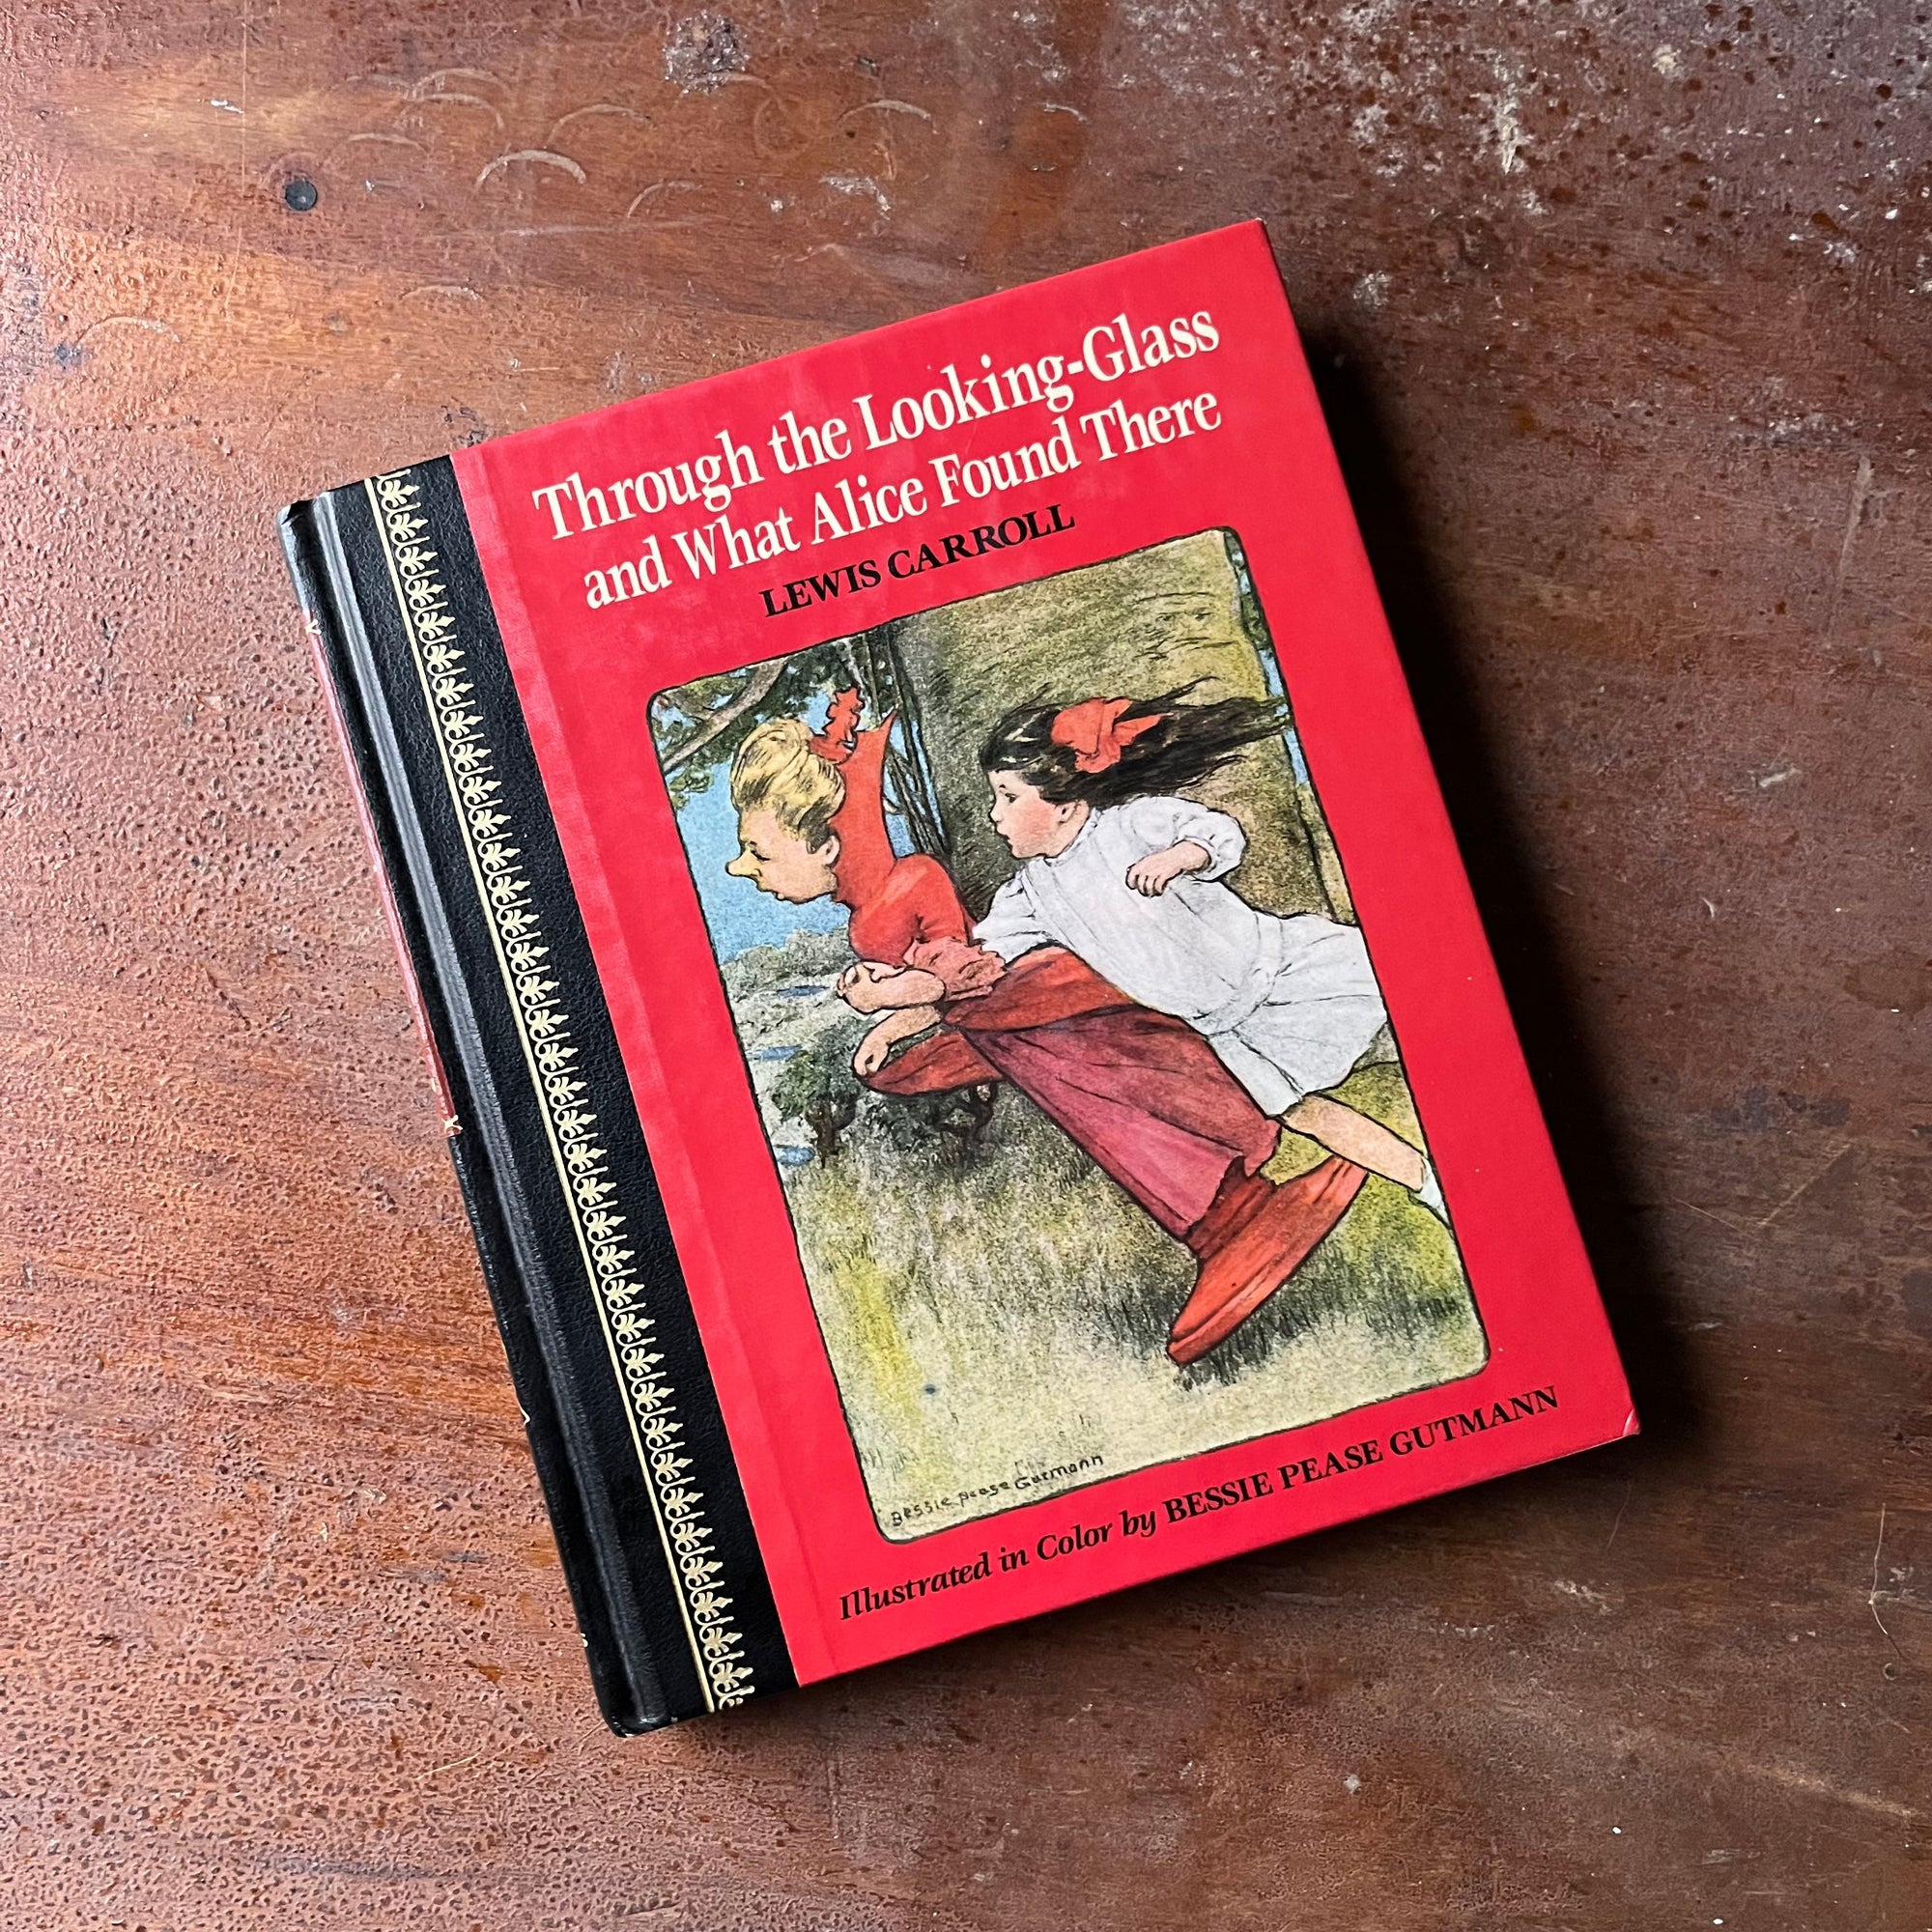 Log Cabin Vintage – vintage children’s book, children’s book, chapter book, Children's Classics Edition - Through the Looking Glass and What Alice Saw There by Lewis Carroll with color illustrations by Bessie Pease Gutmann and drawings by John Tenniel - view of the front cover